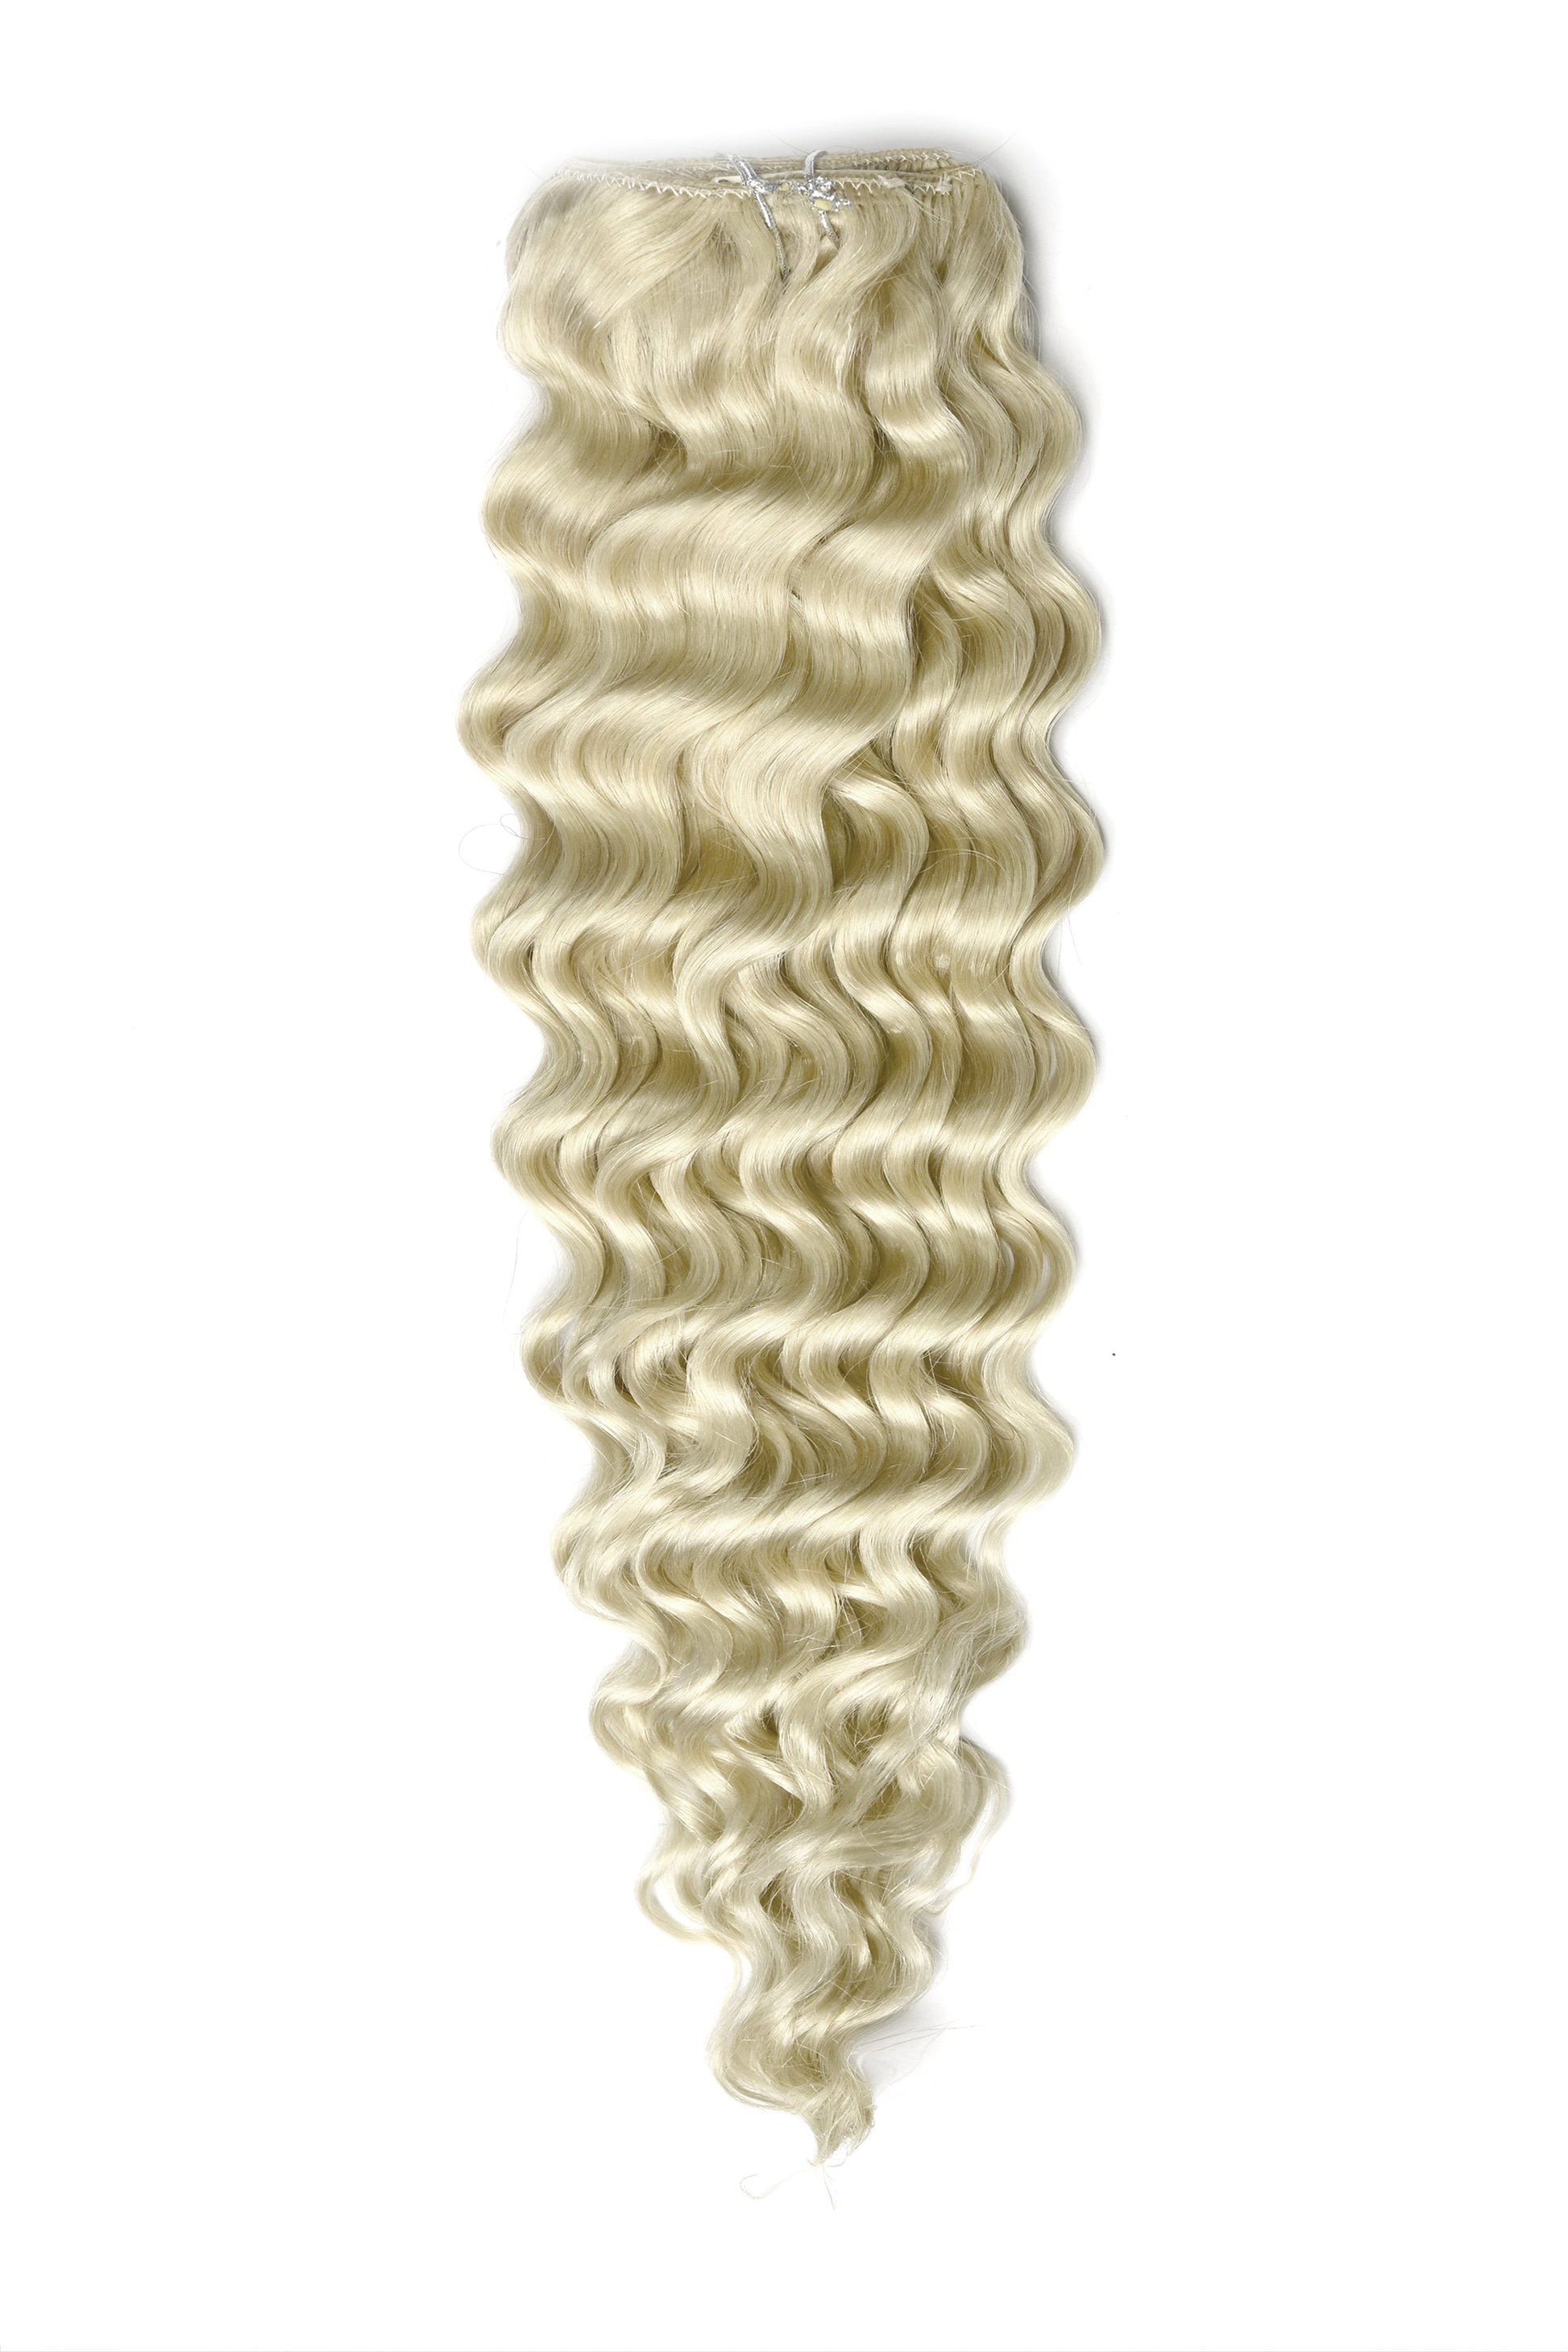 Curly hair extensions ice blonde clip in type-c curls